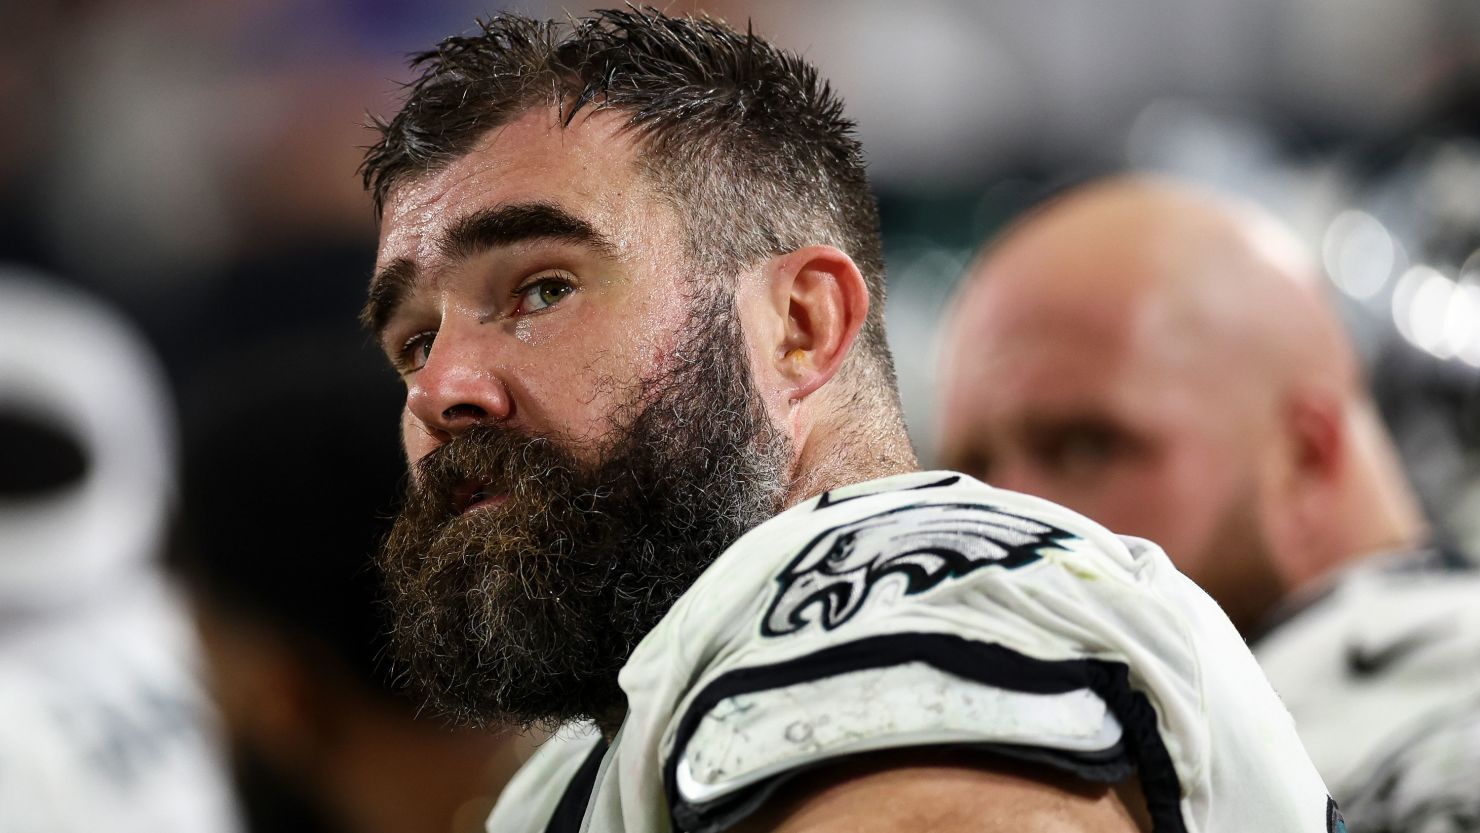  NFL Star Jason Kelce's Big Leap: From Eagles Legend to Broadcasting's Next Big Voice?